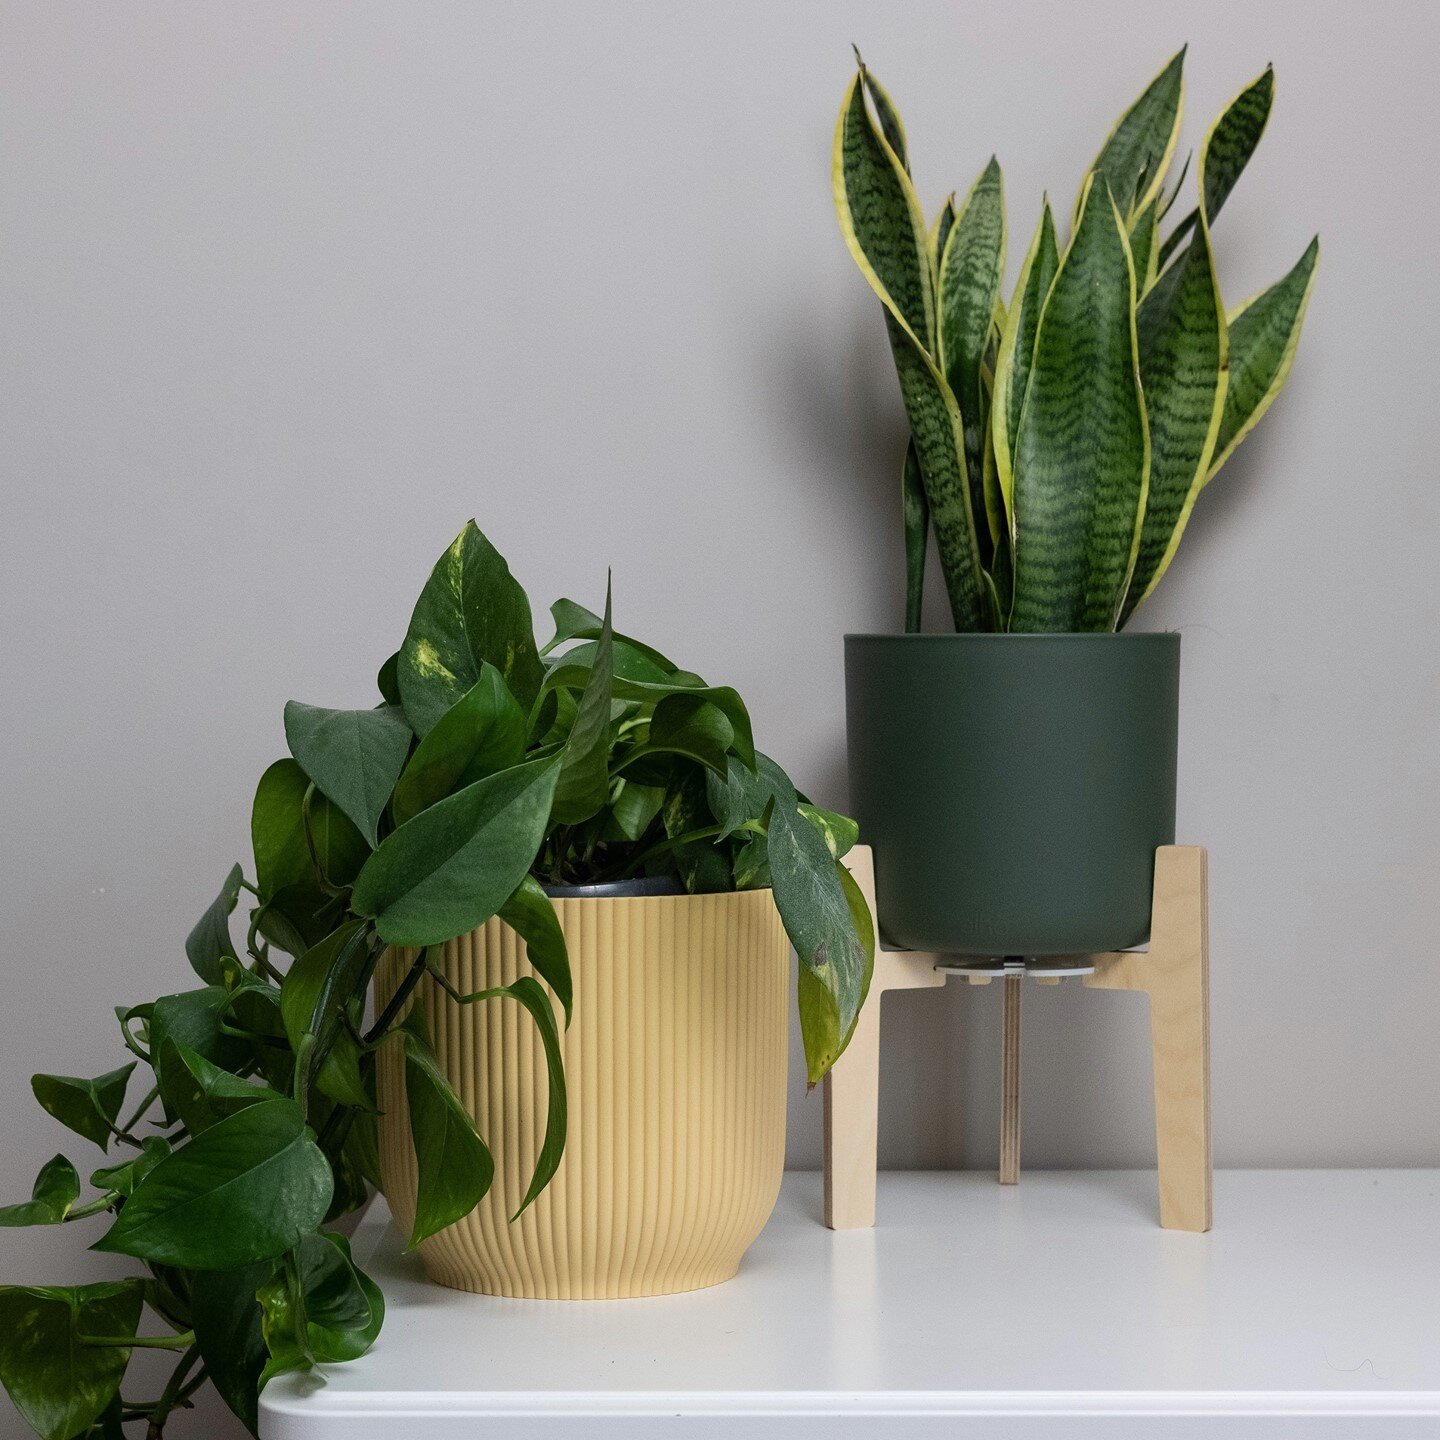 Hey Guys!⠀
⠀
As promised, our NEW small and medium sized plant stands are now available on the website! WAHOOO🚀⠀
⠀
We are offering free standard delivery on all plant stand orders until this Friday at Midnight, enter FREEPOST at checkout.⠀
⠀
We are 